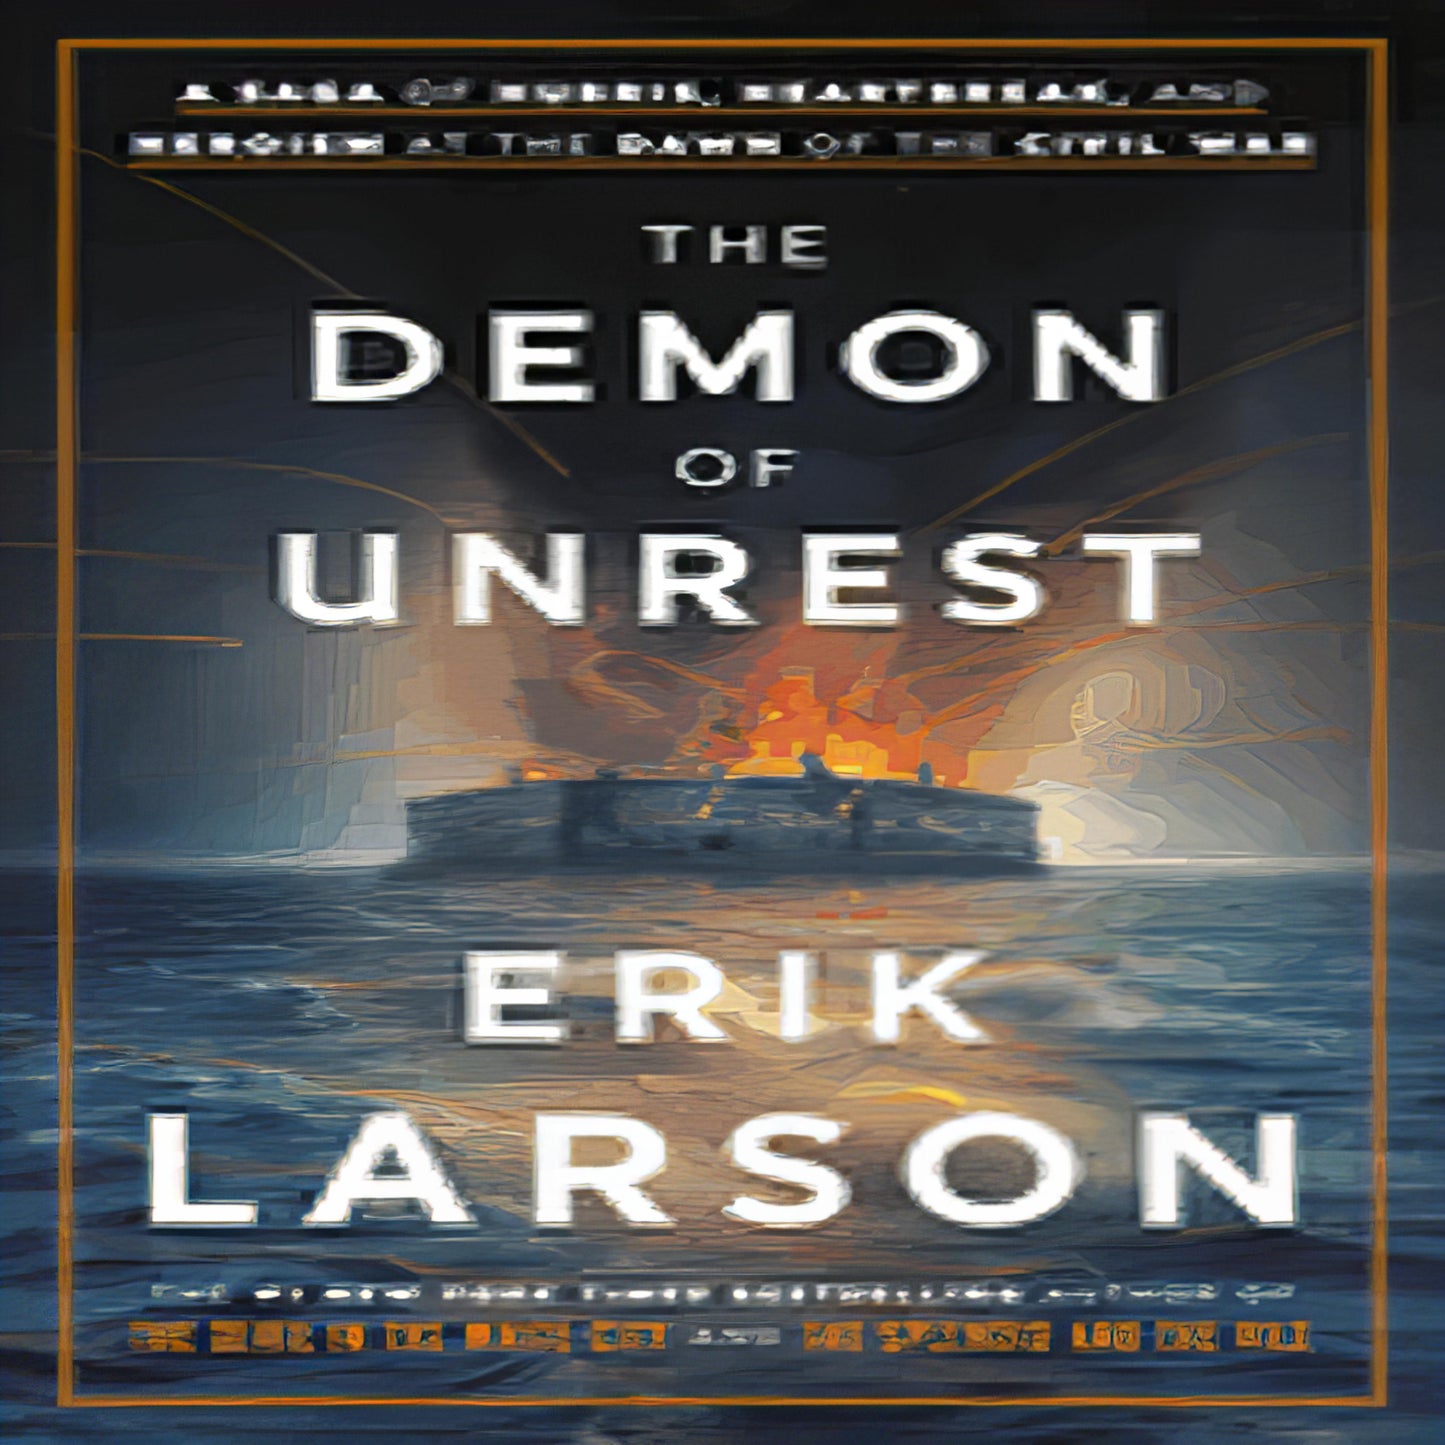 The Demon of Unrest: A Saga of Hubris, Heartbreak, and Heroism at the Dawn of the Civil War - Street Smart